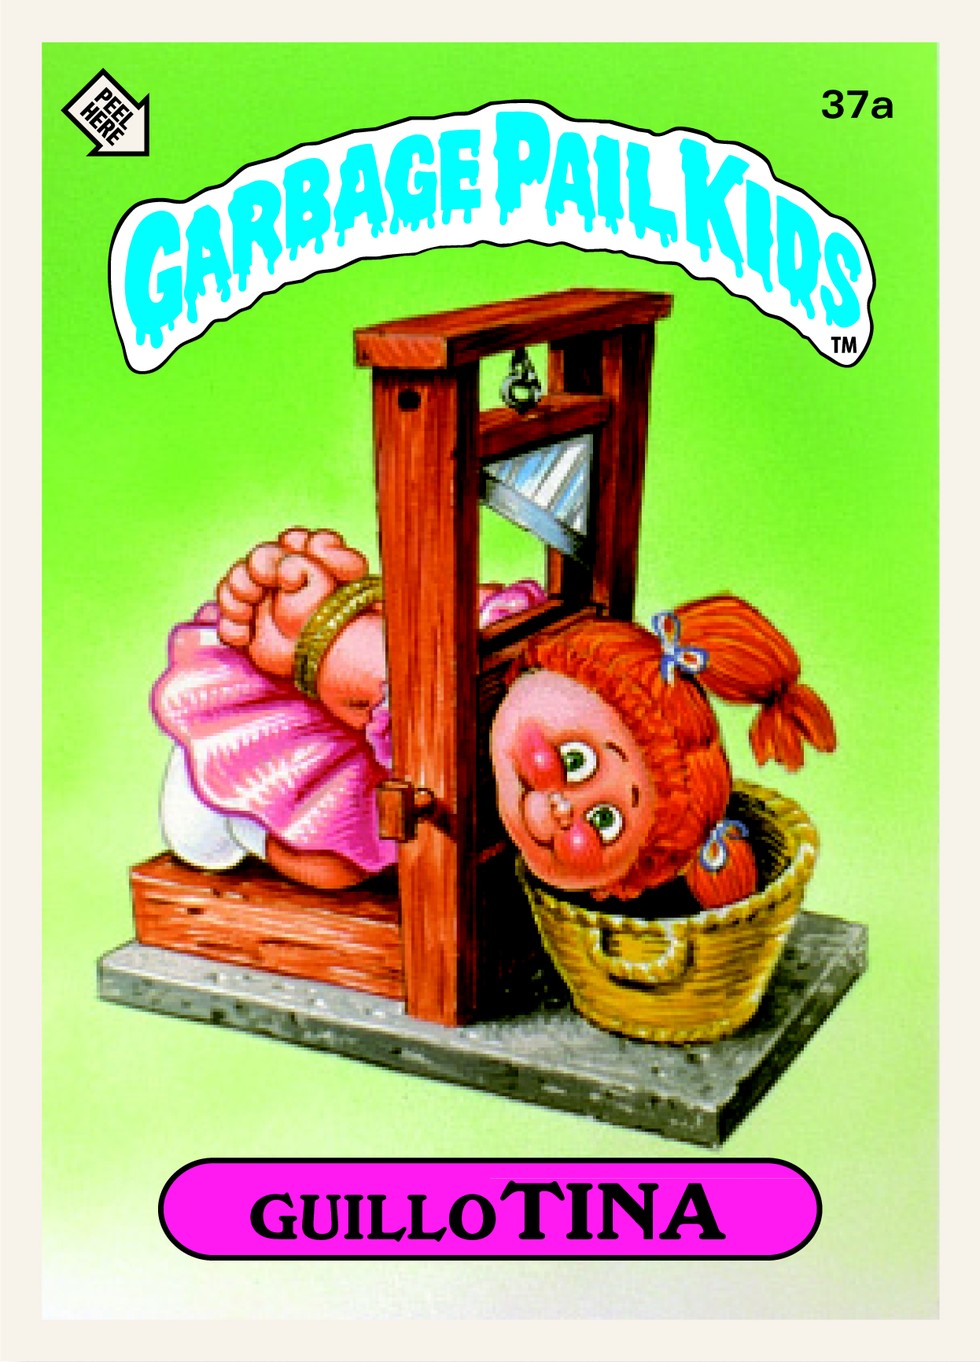 Check Out Original Garbage Pail Kids Cards From the Upcoming Topps Book - PAPER